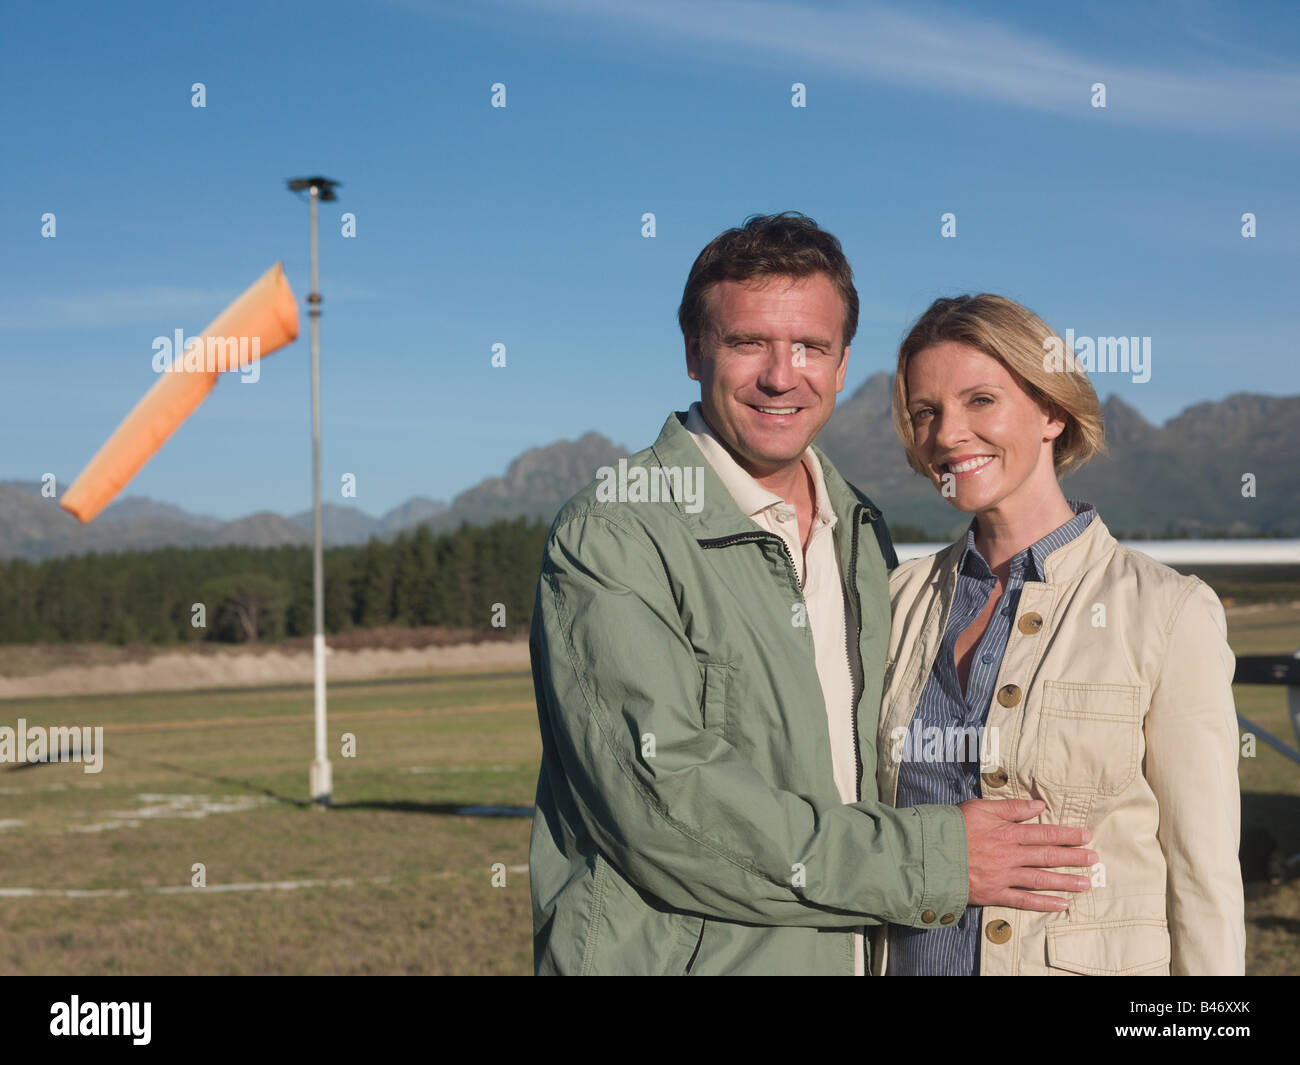 Couple on airfield Banque D'Images